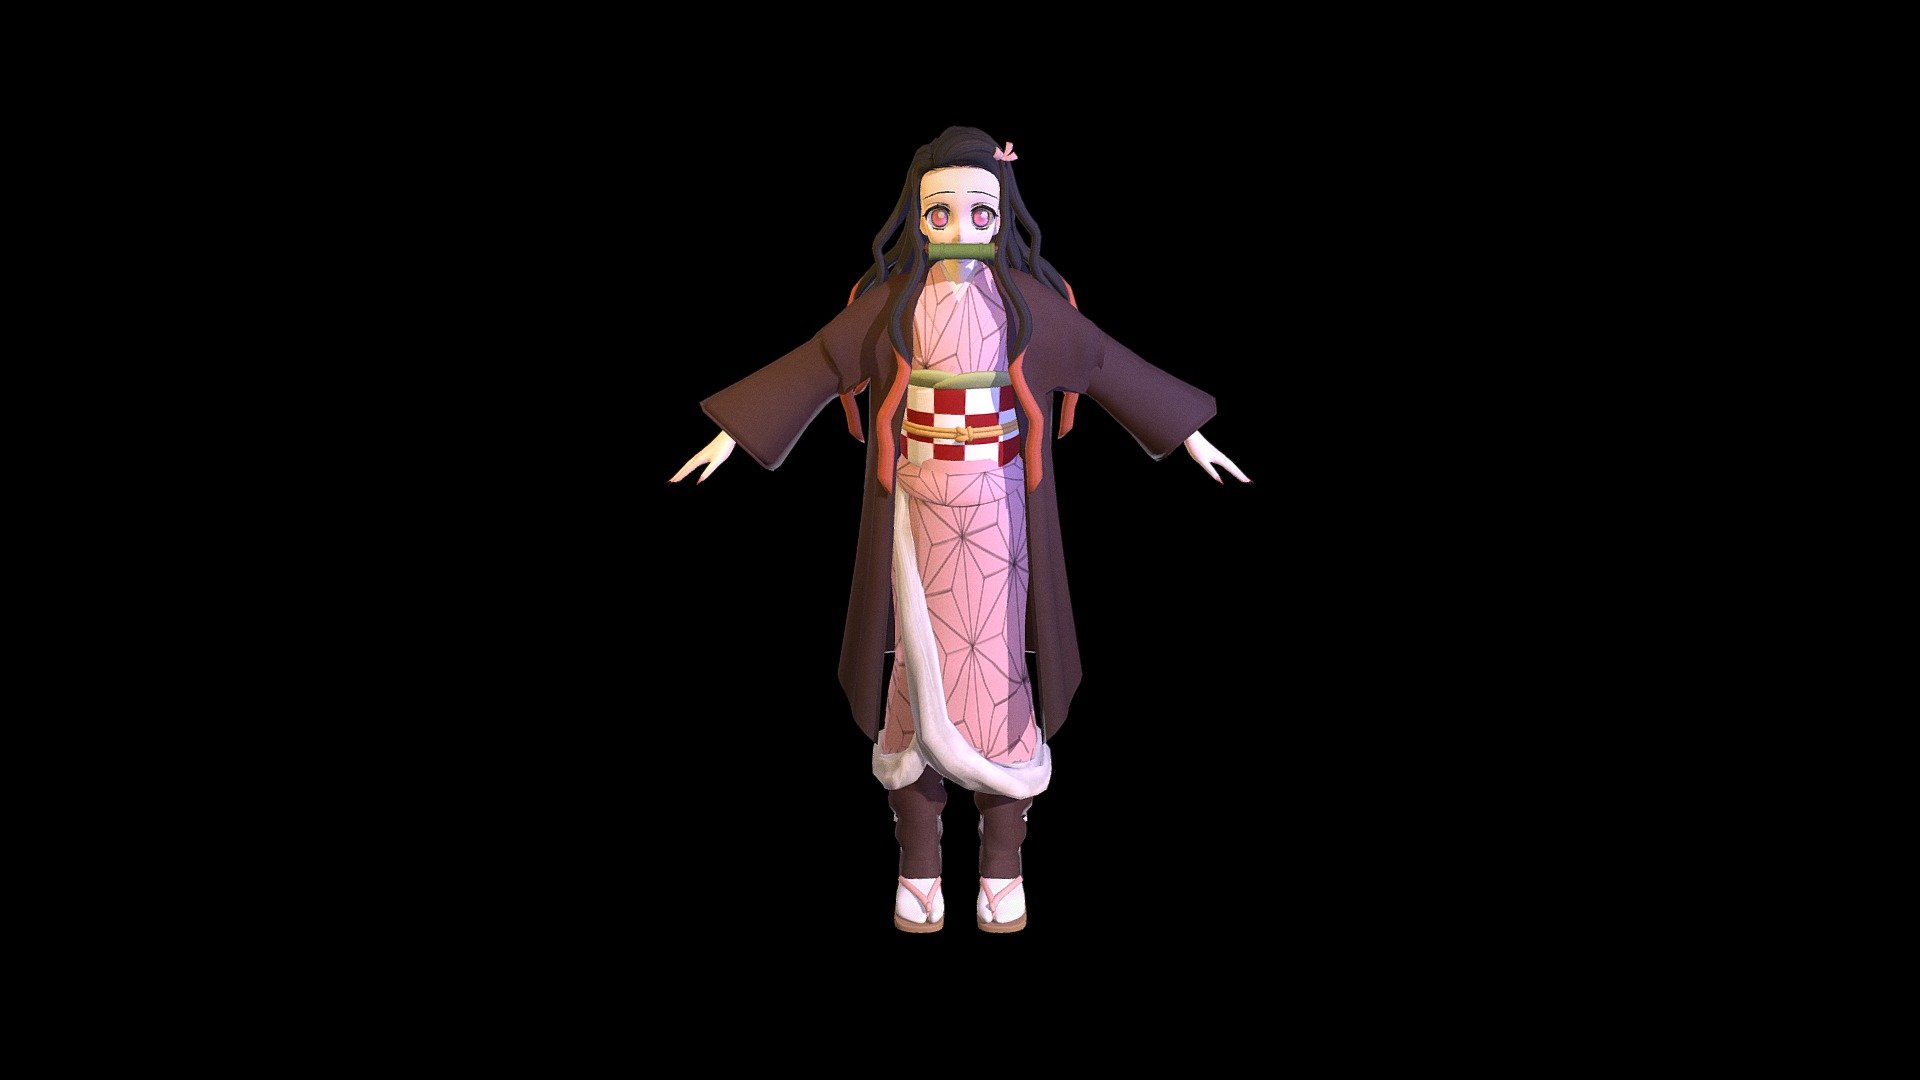 Nezuko Kamado 3D Model With Textures..

High Quality Render,
Enhanced Textures,
Game Ready Model,
Ready For Video Editing. 3d model